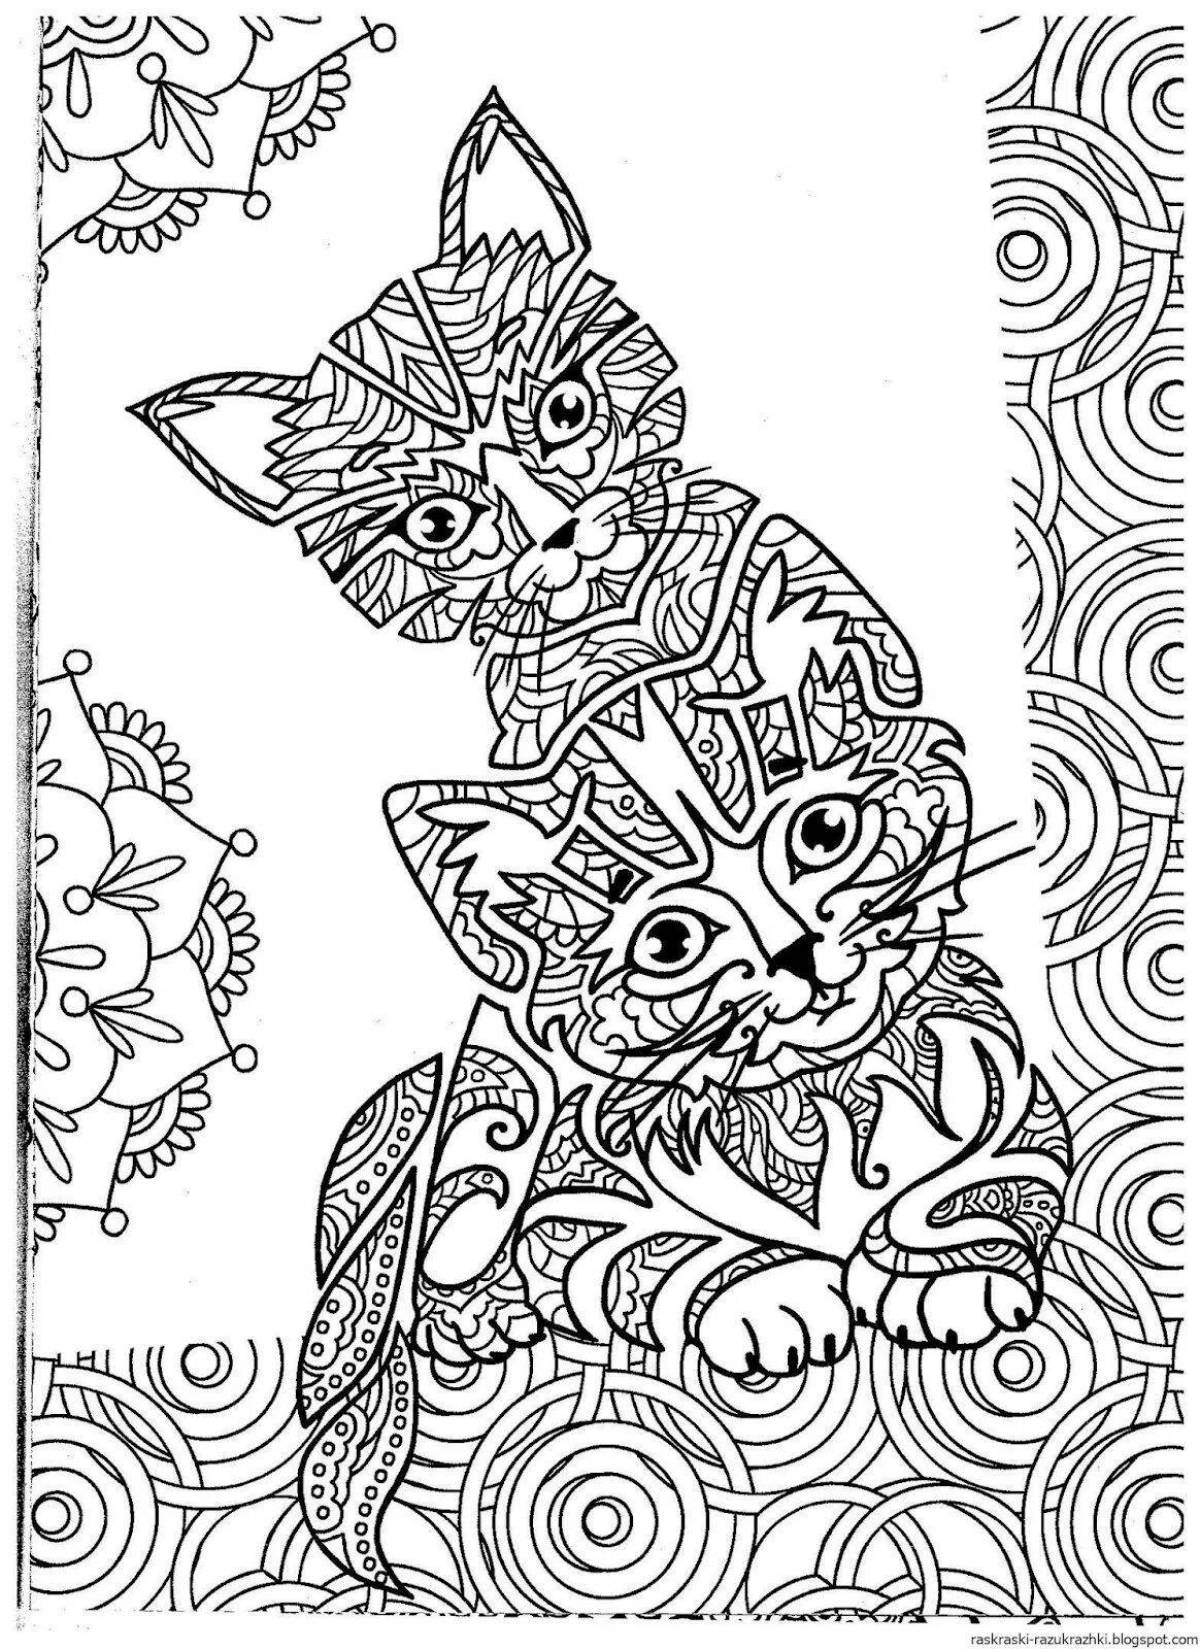 Exquisite patterned cat coloring page